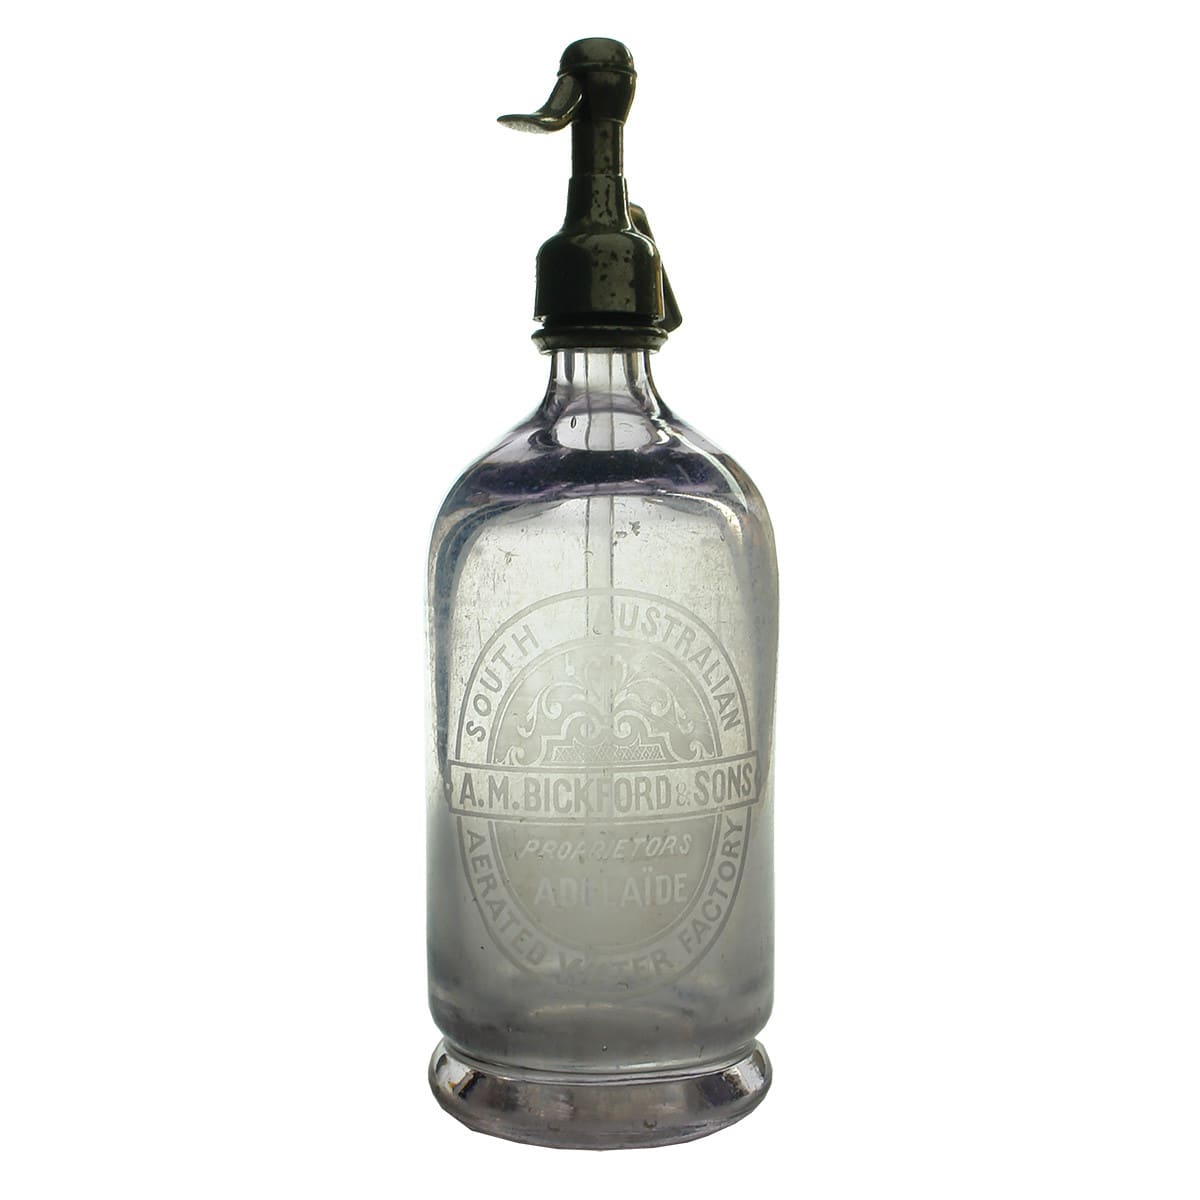 Soda Syphon. A. M. Bickford & Son South Australian Aerated Water Factory, Adelaide. Amethyst. 30 oz. (South Australia)